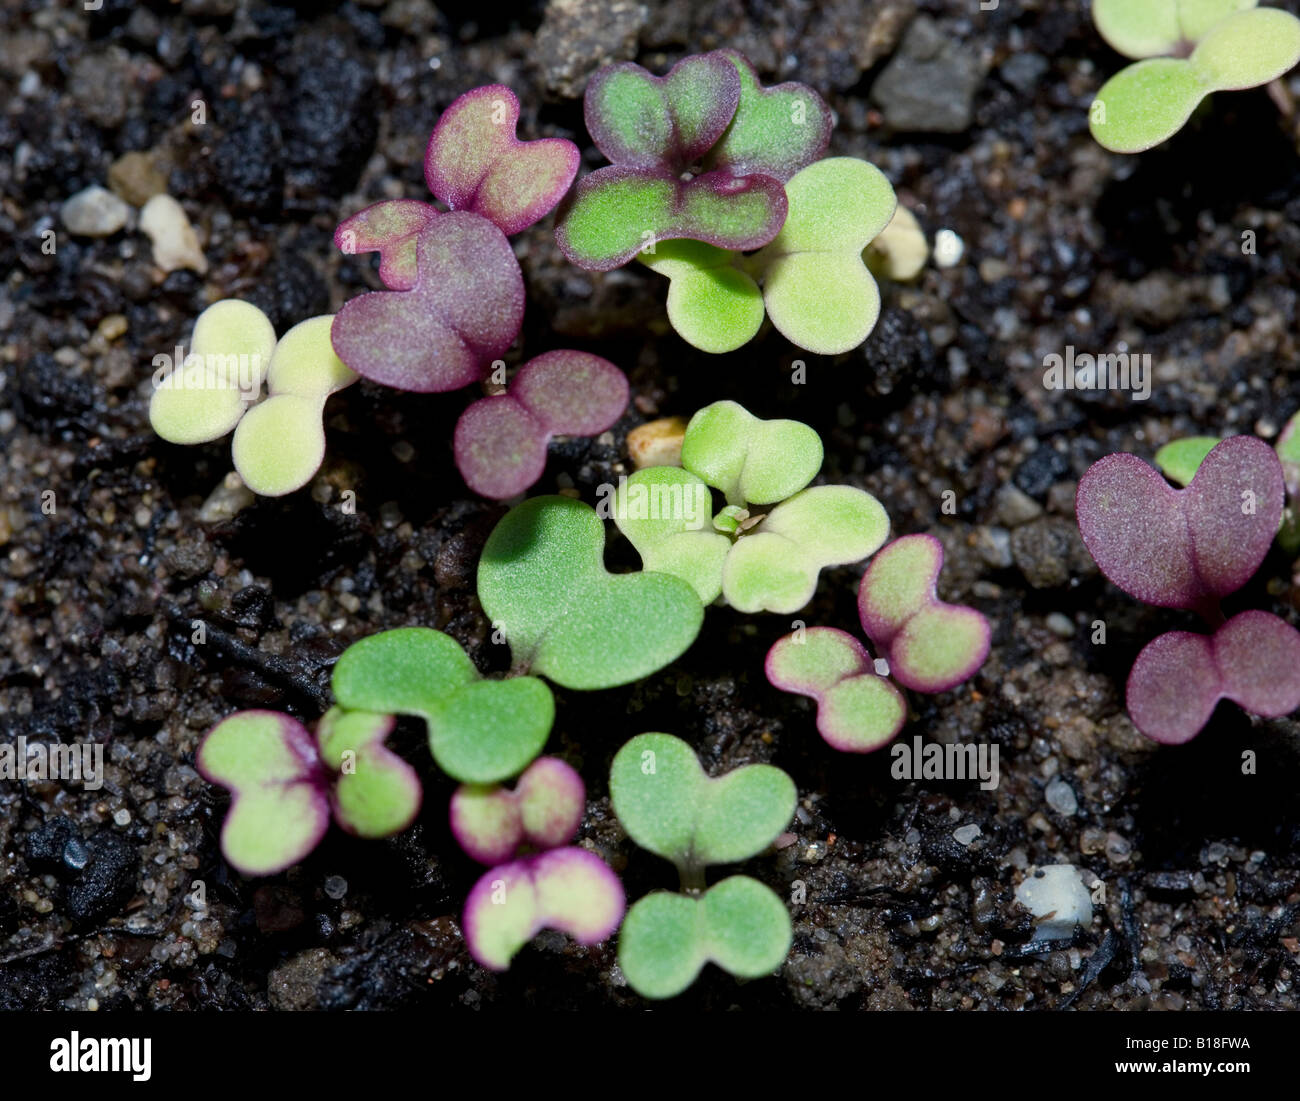 Spicy mix salad seedlings growing in organic compost Stock Photo